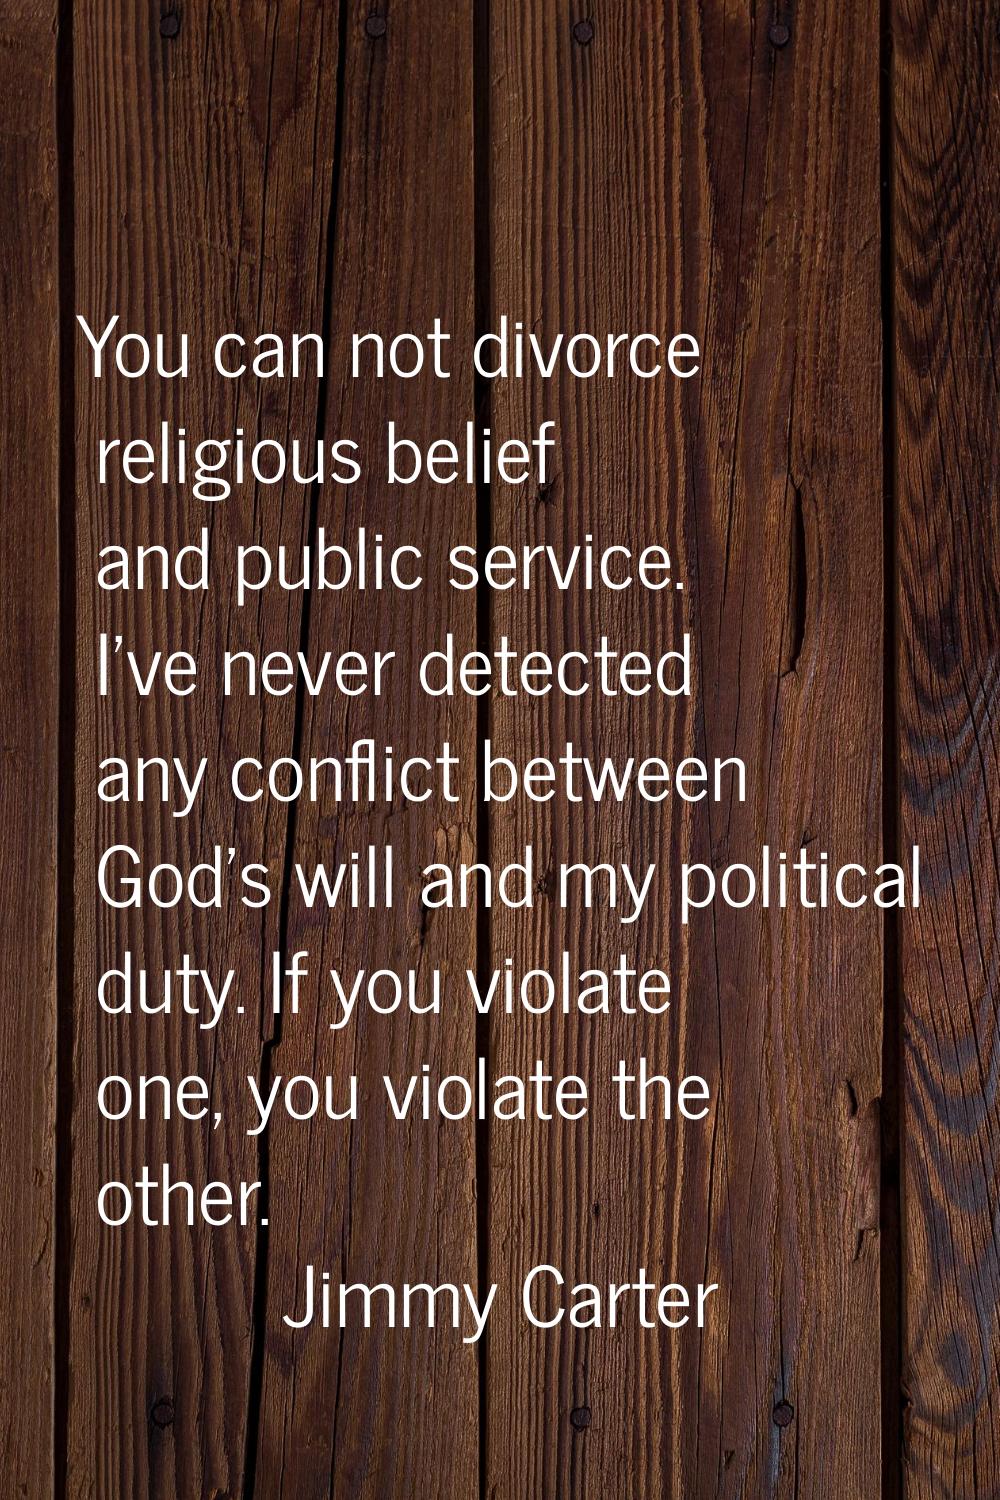 You can not divorce religious belief and public service. I've never detected any conflict between G